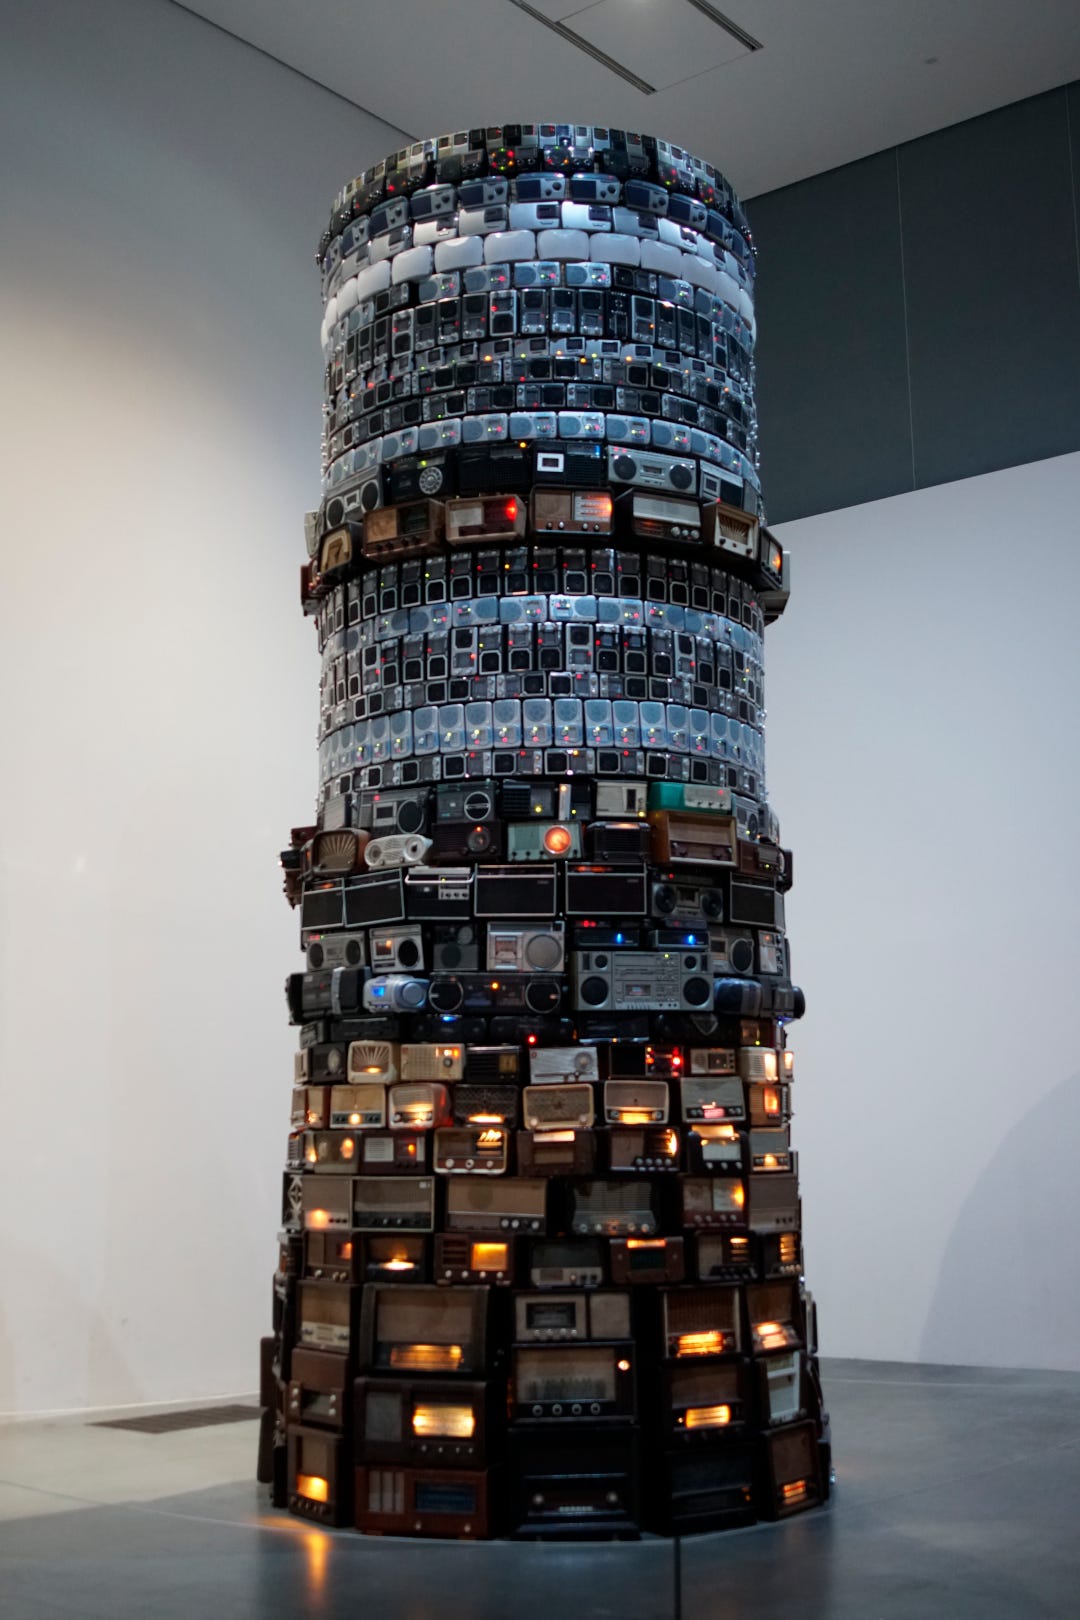 800 Radios Tower Over You in Overwhelming Installation Artwork | by Oli  Gudgeon | Contemporary Sound Art | Medium